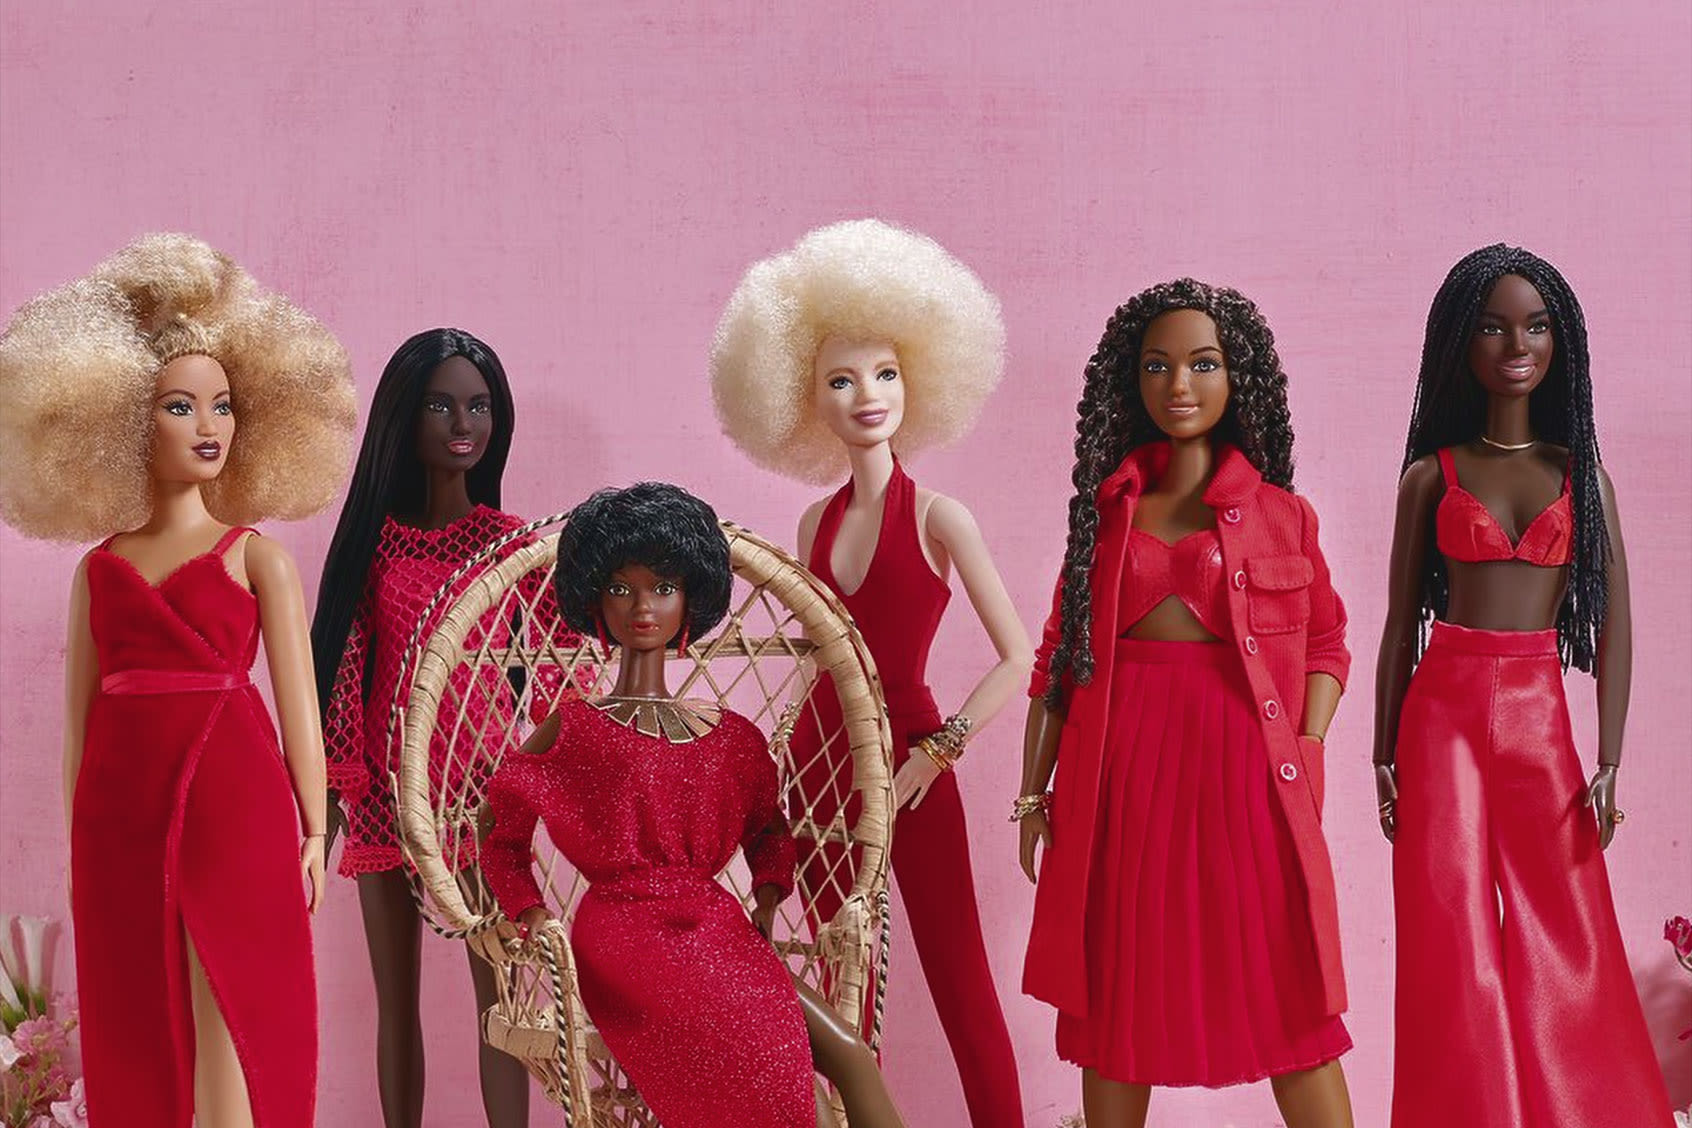 "Black Barbie was different": Six fascinating details from Shonda Rhimes' Netflix documentary